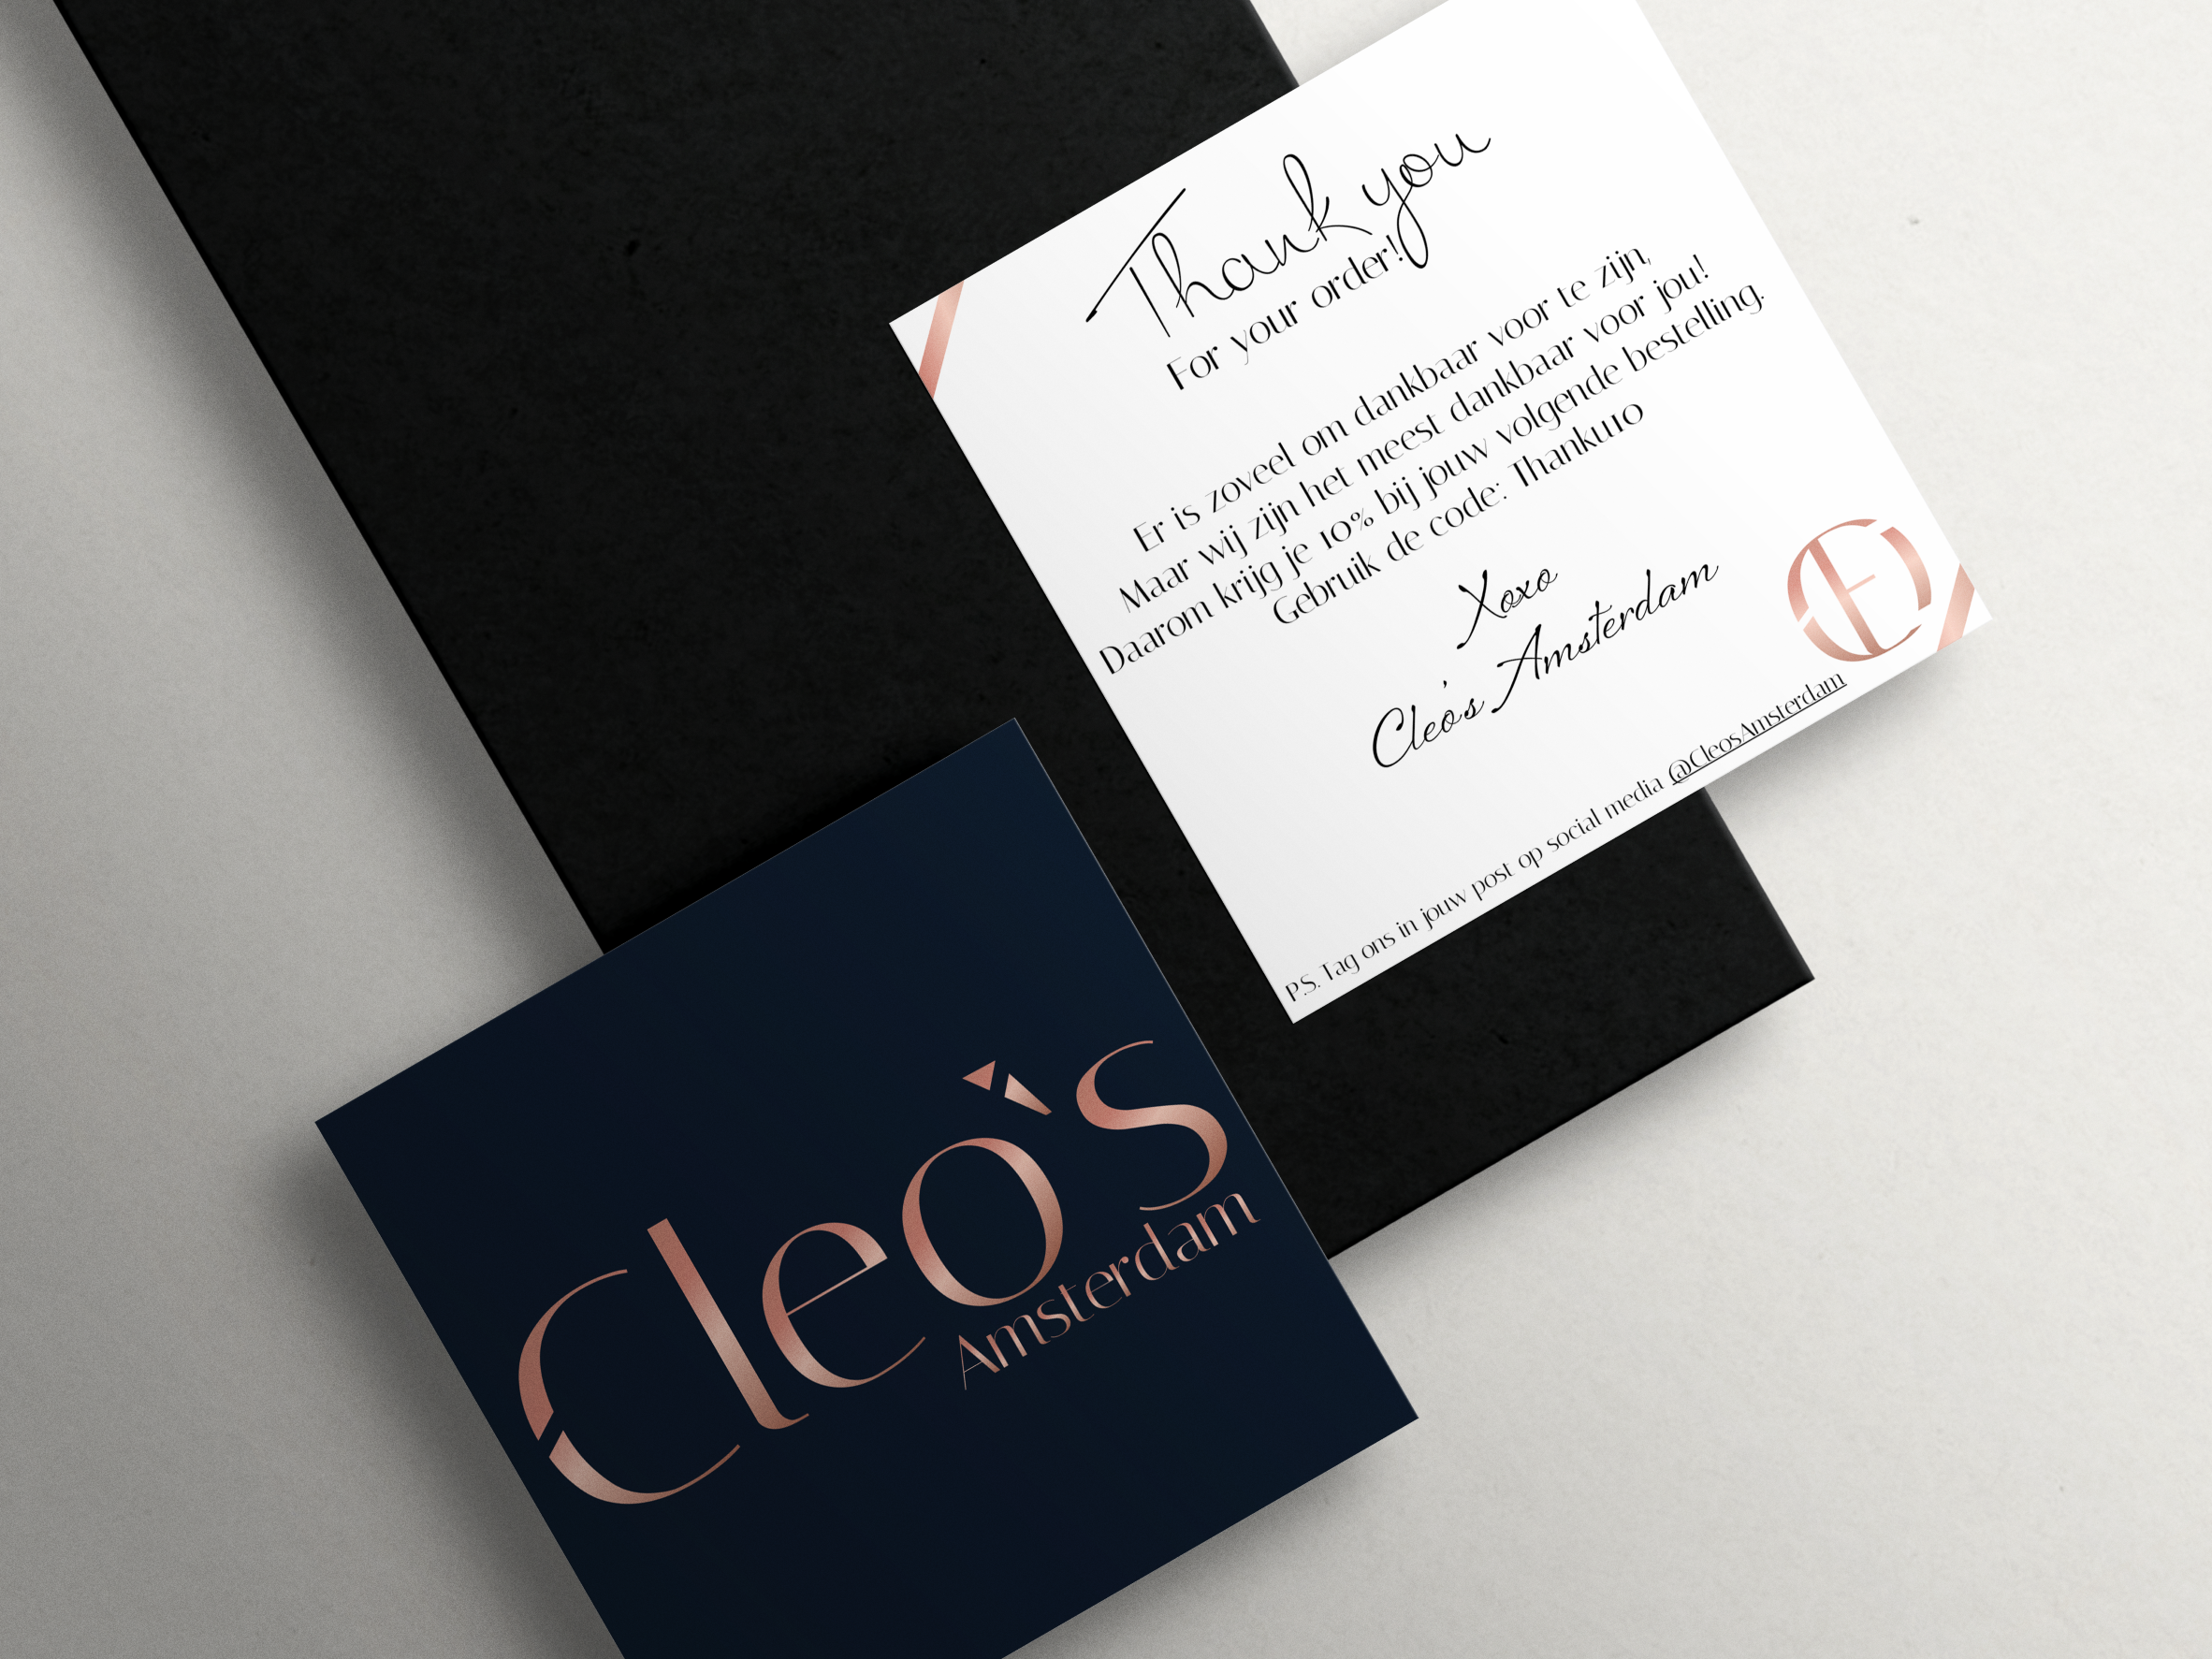 Cleo's thank you card